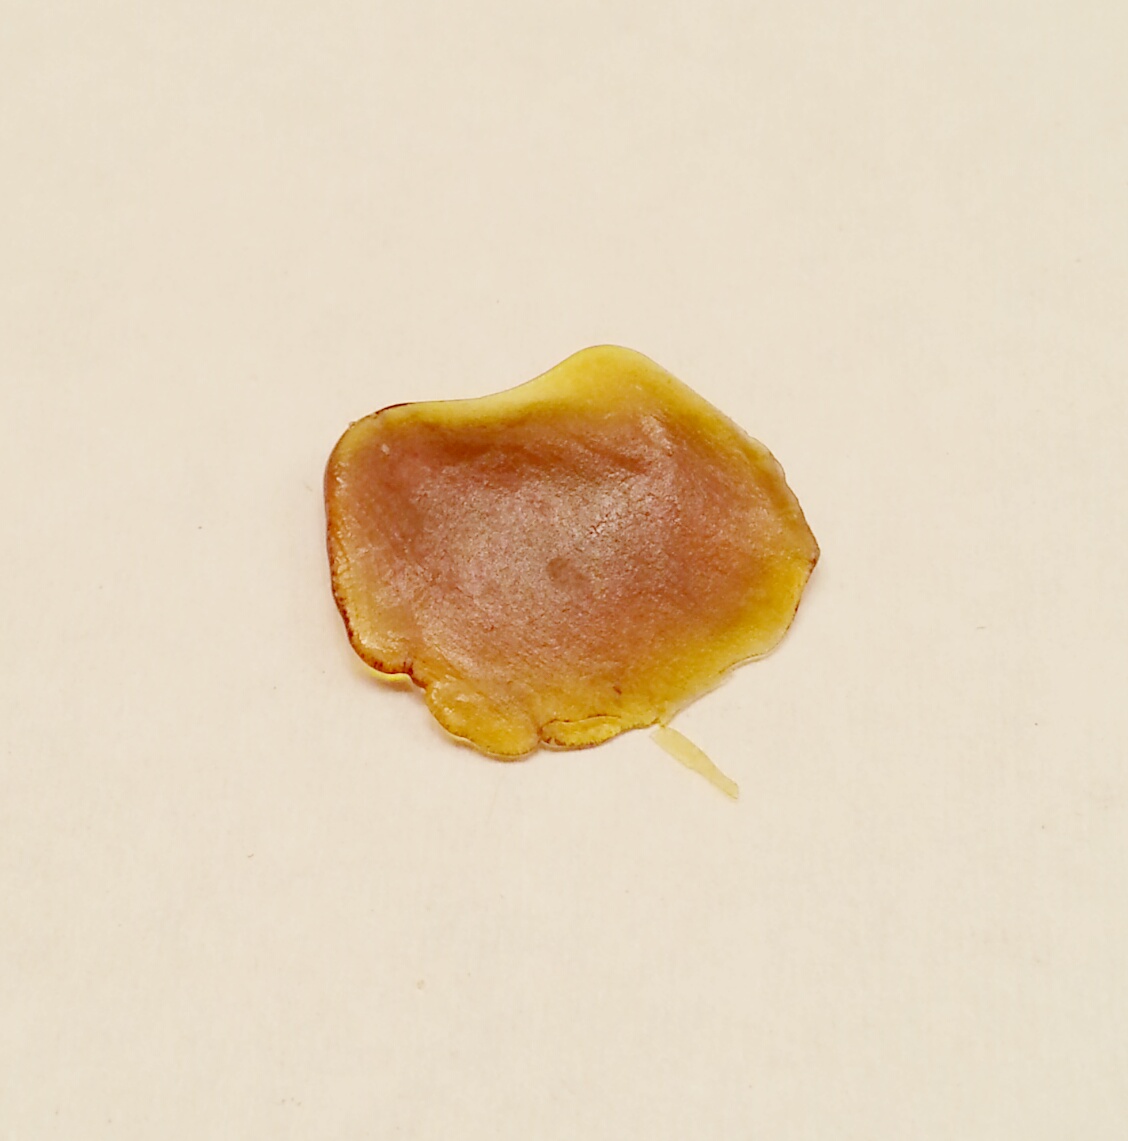 Super G-13 shatter from Elevated Dreams Concentrate Review